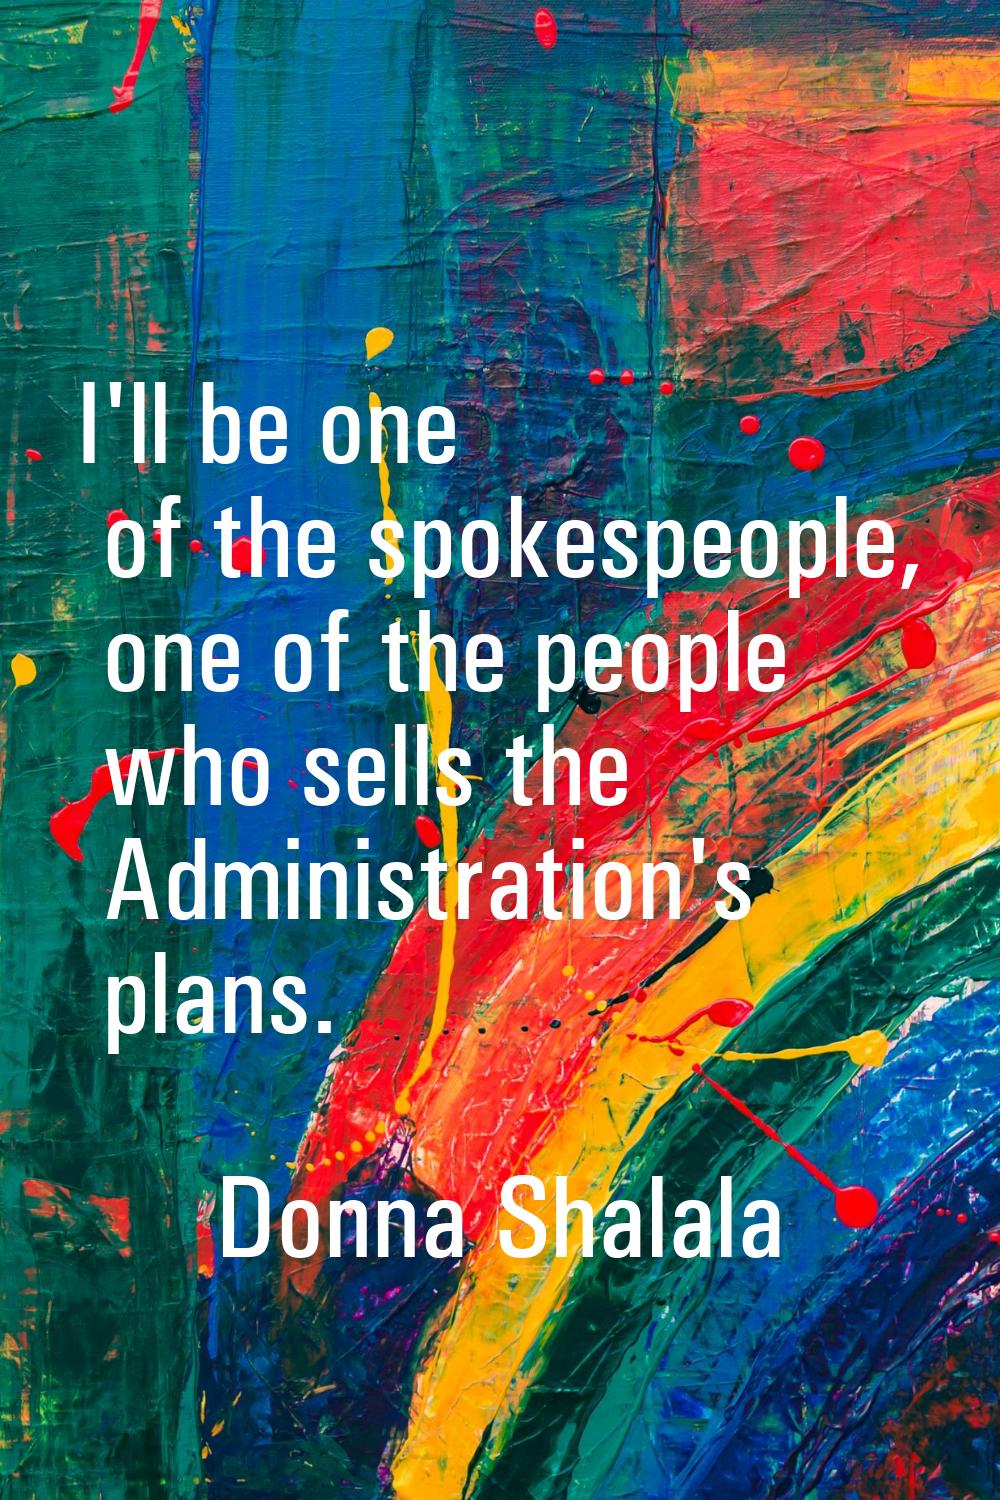 I'll be one of the spokespeople, one of the people who sells the Administration's plans.